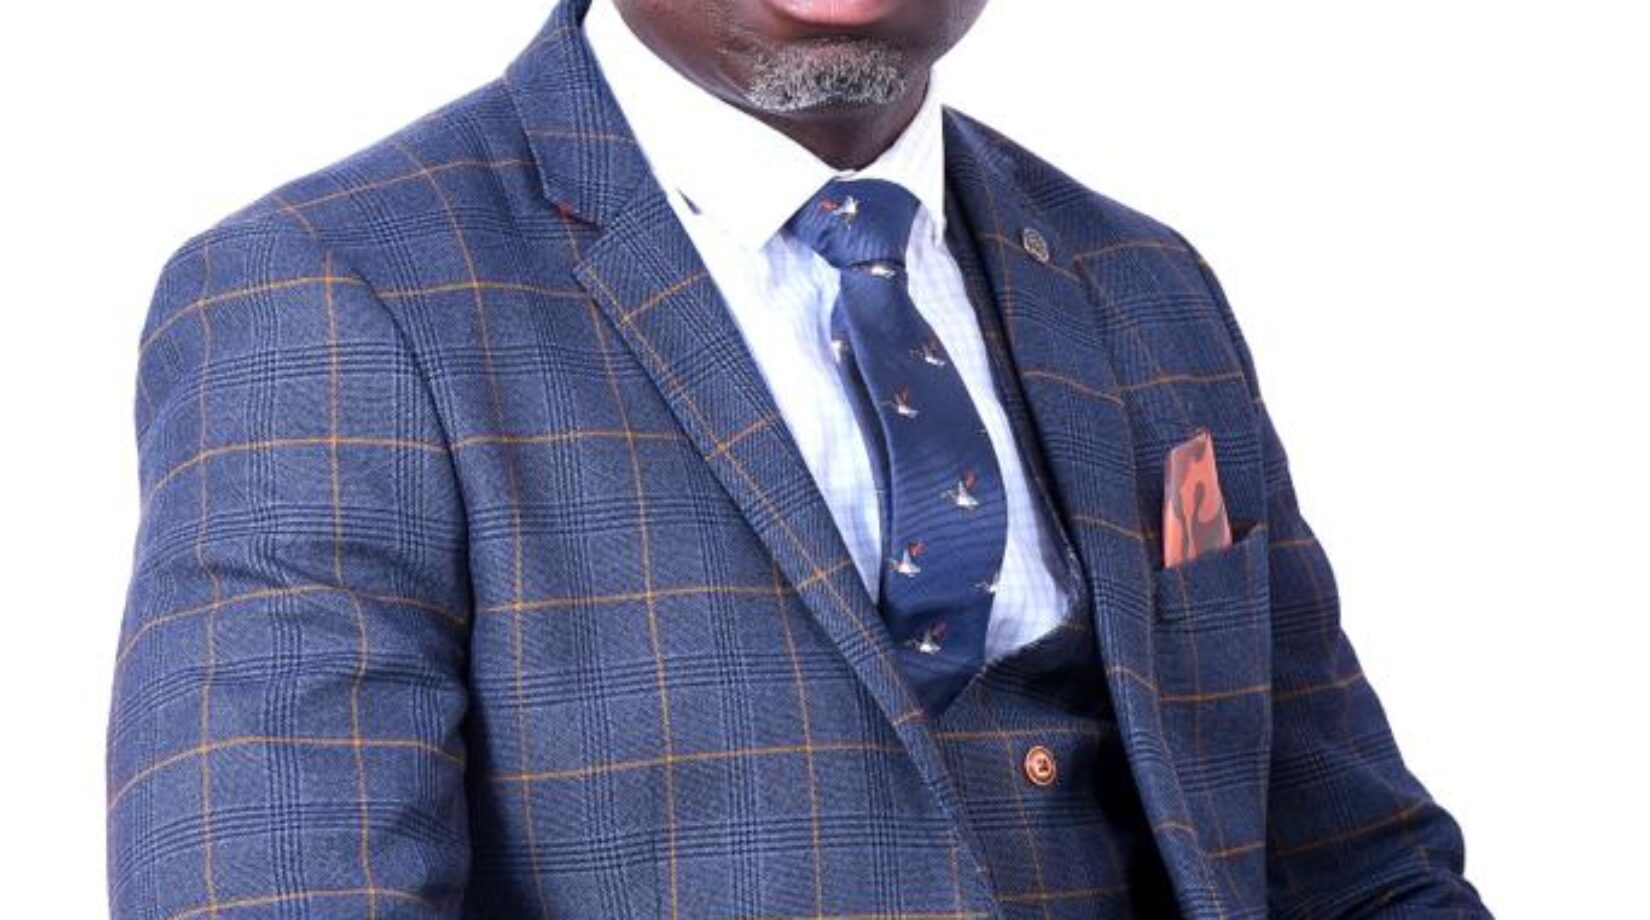 High attrition rate poses danger to the nation’s education-Dr Addai-Poku